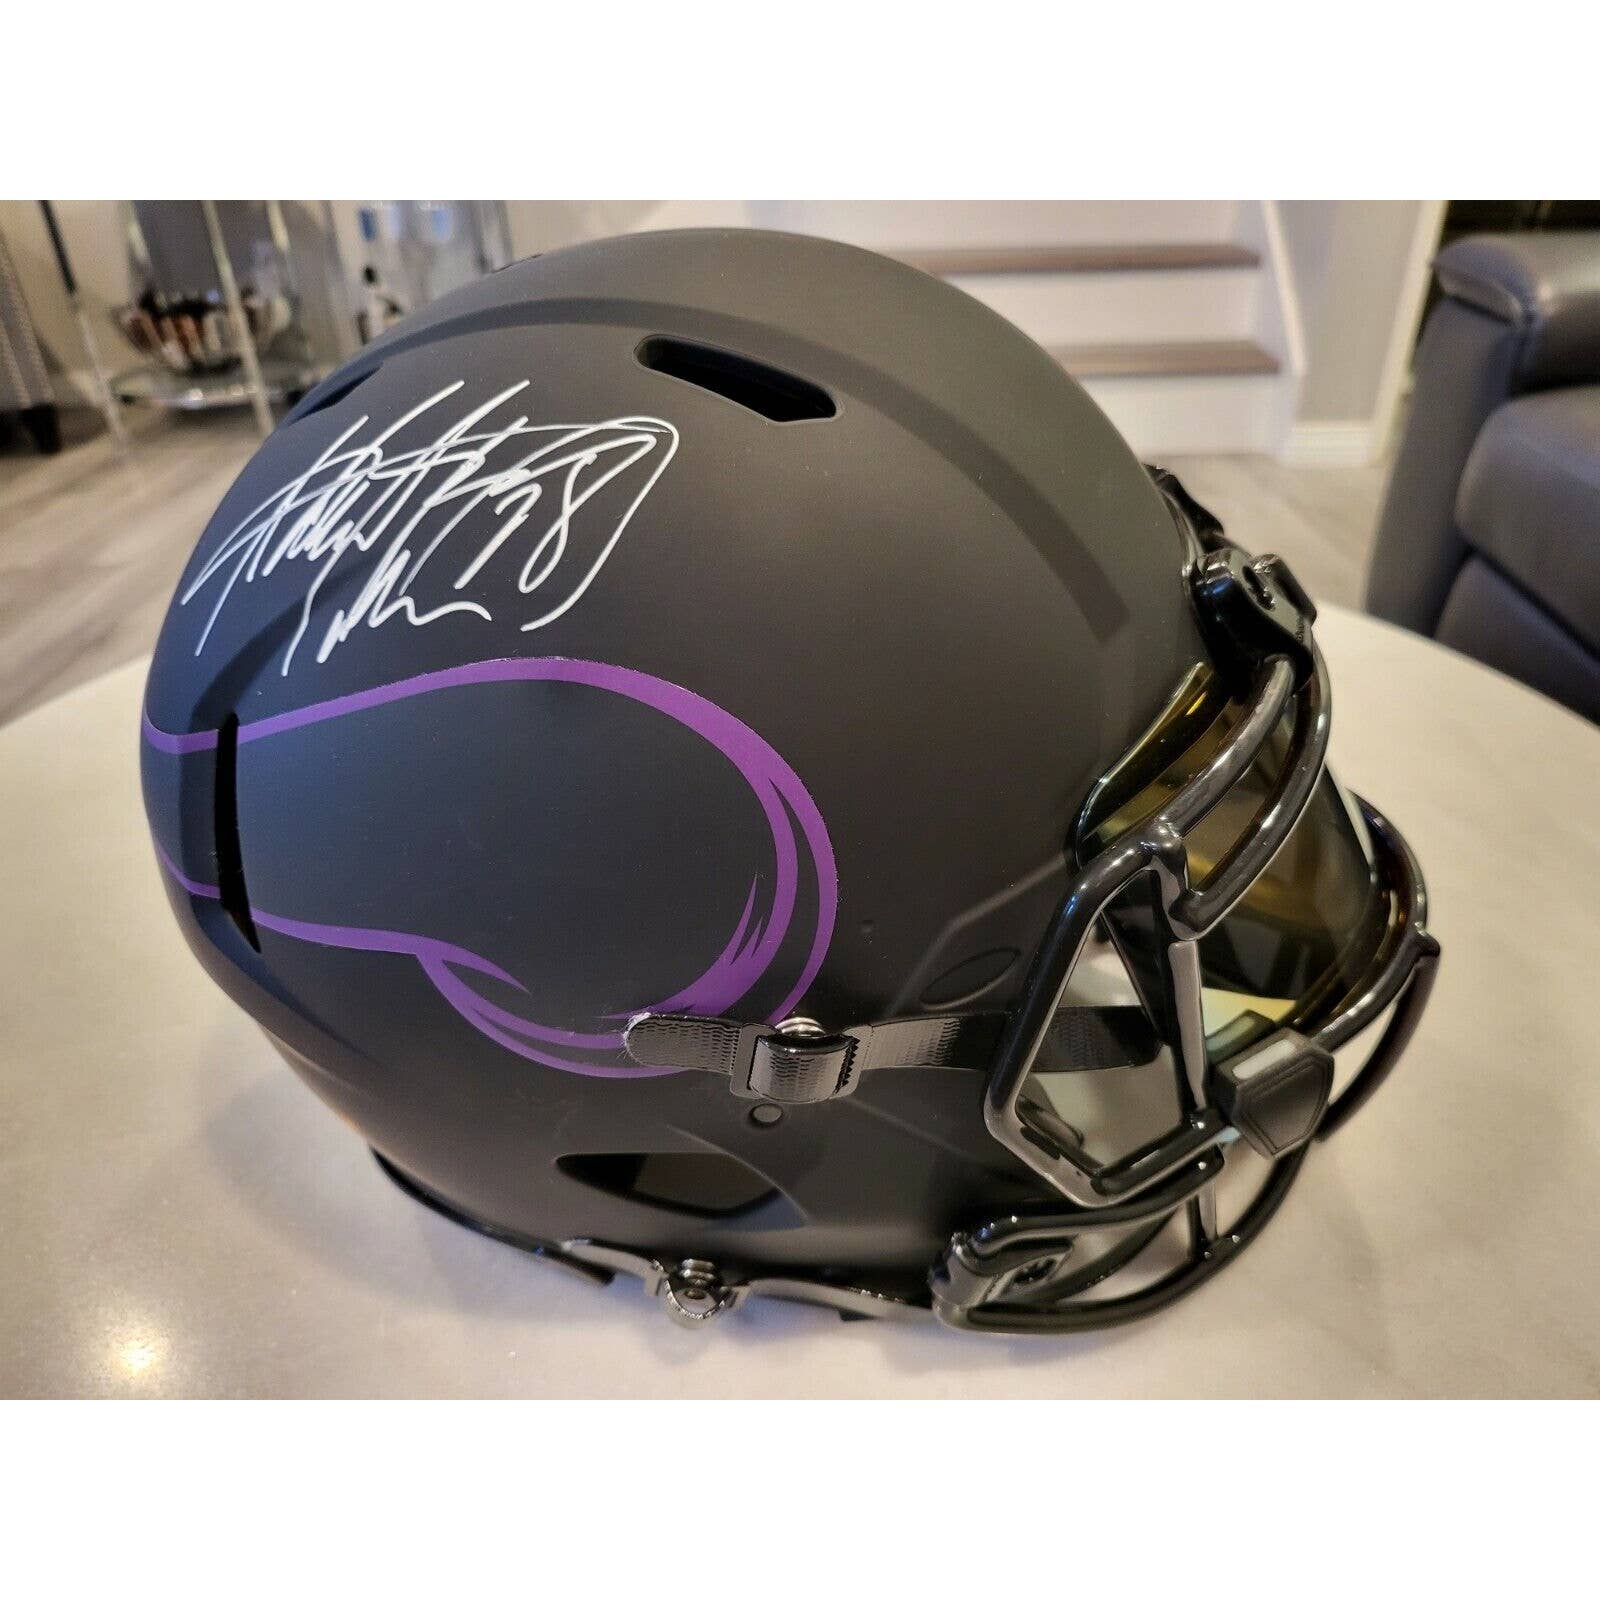 Adrian Peterson Autographed/Signed Authentic Full Size Helmet Eclipse Visor - TreasuresEvolved